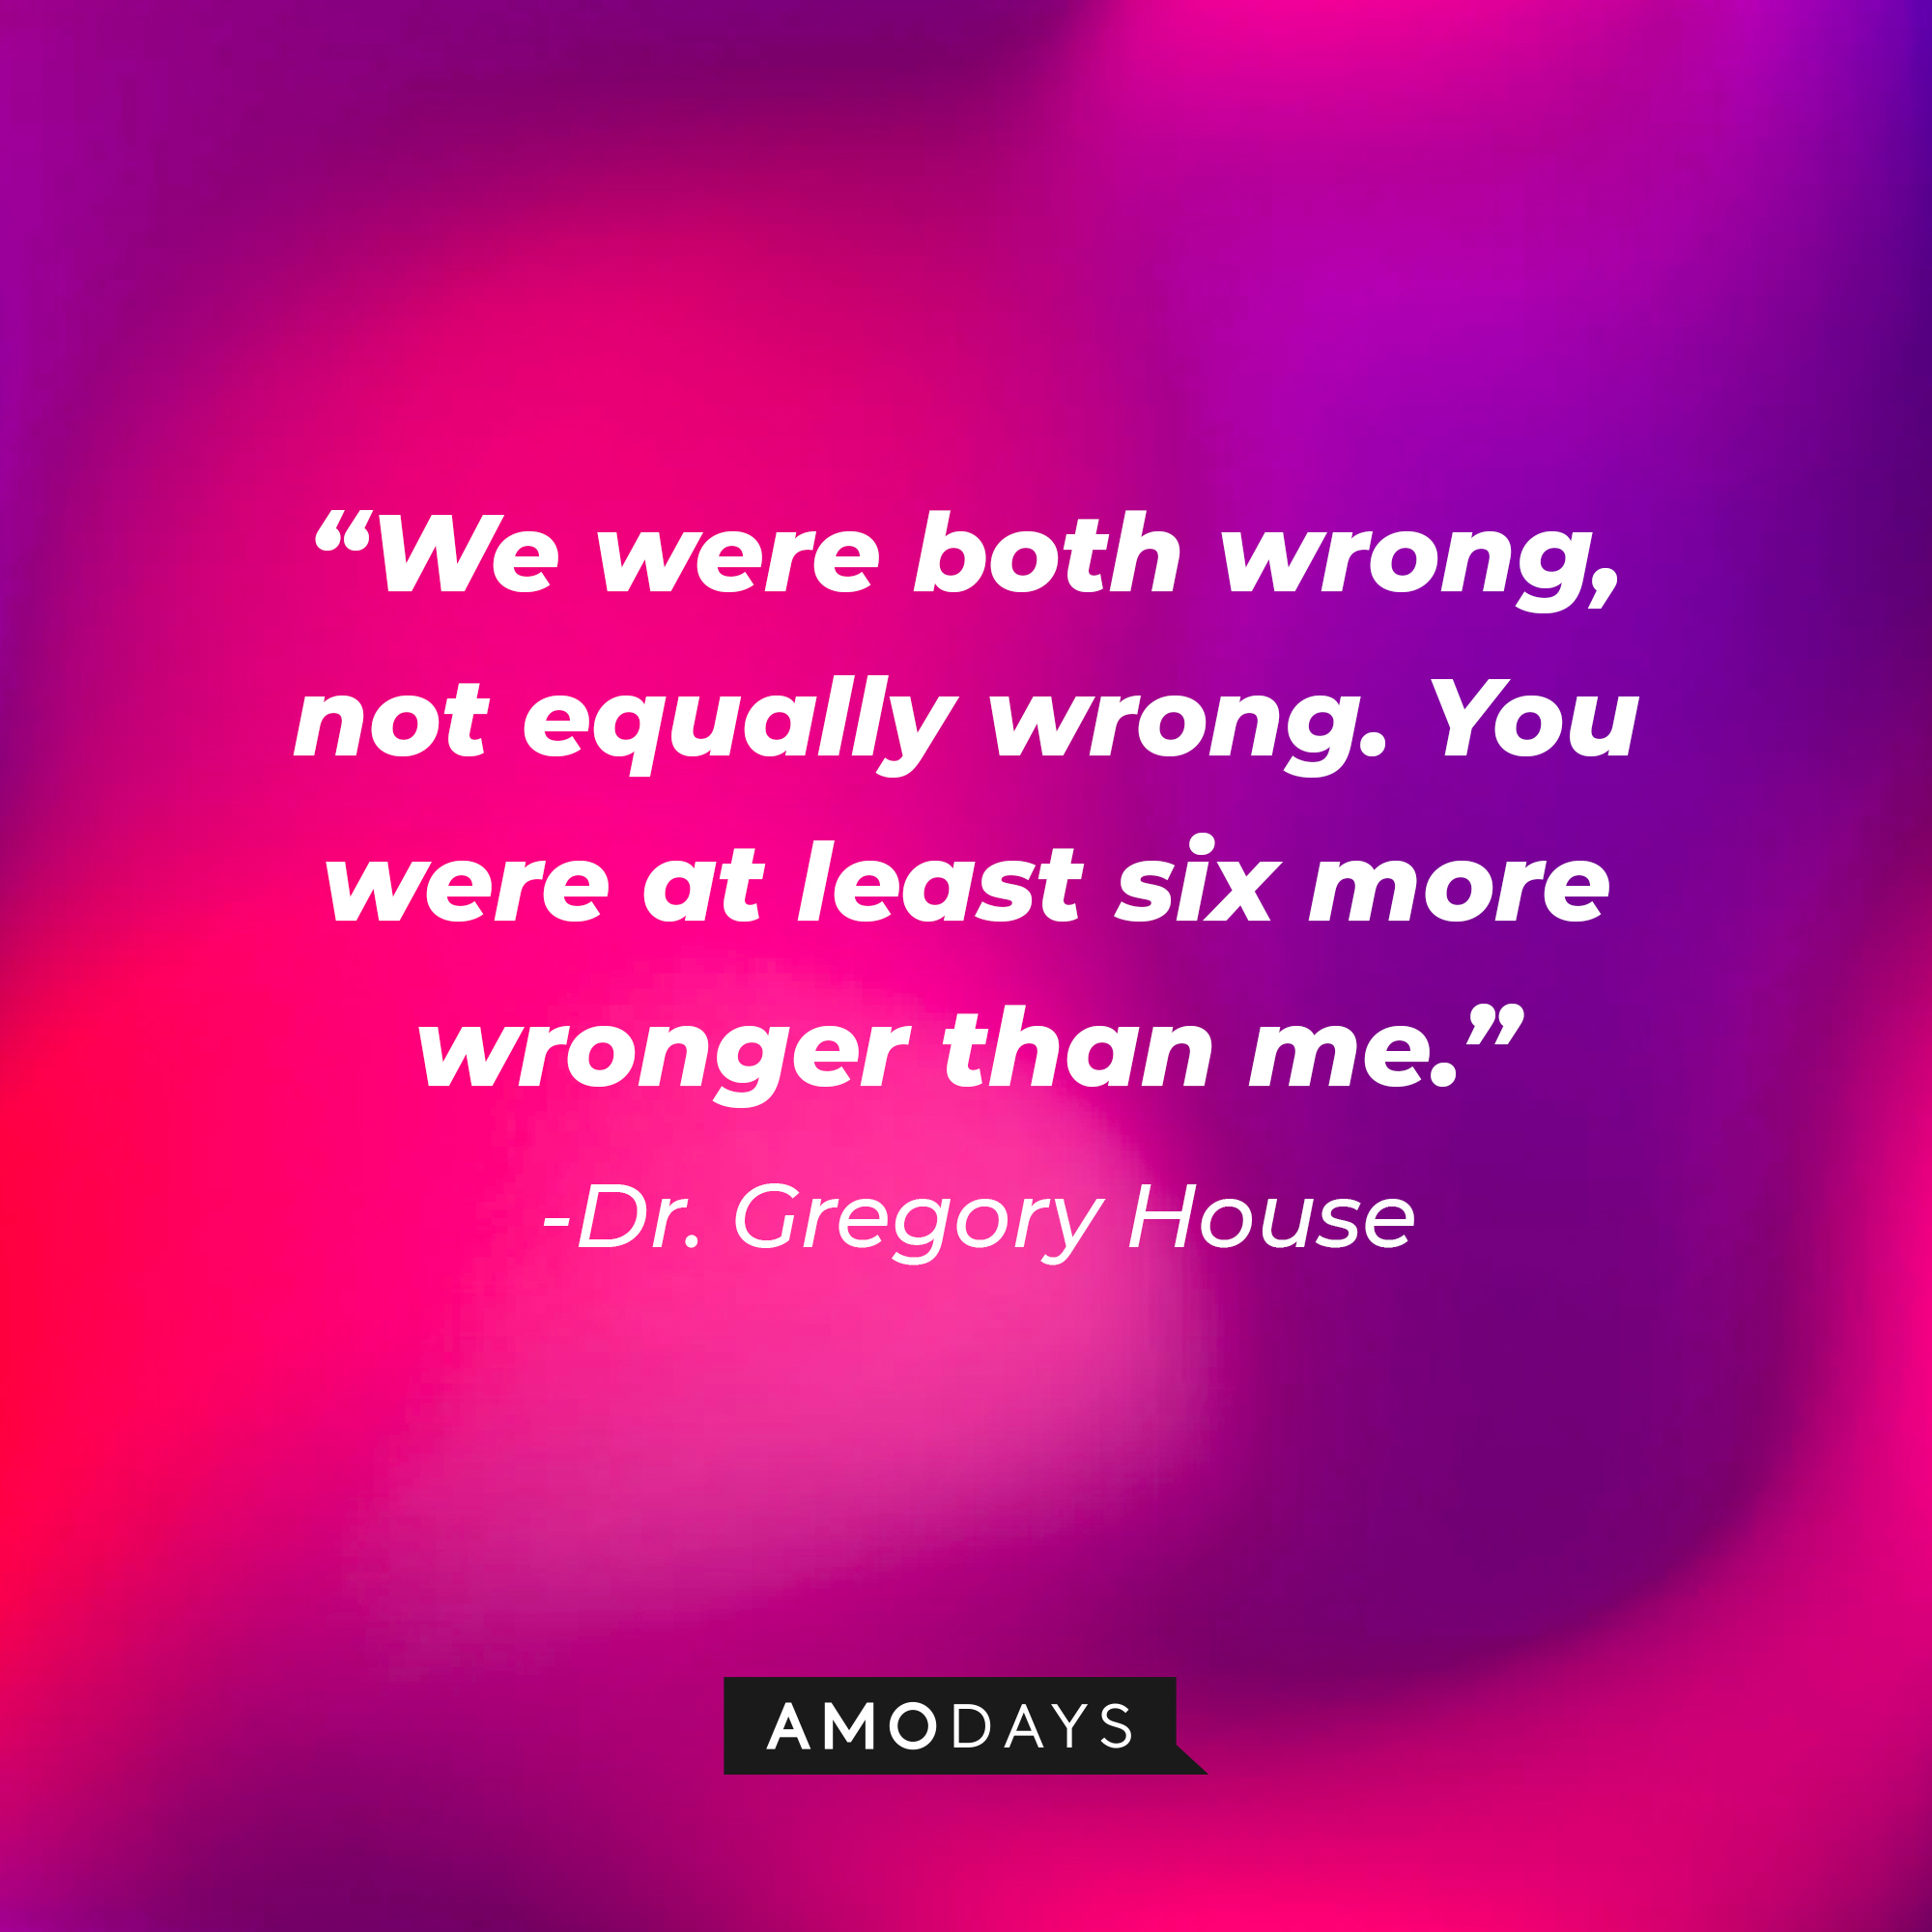 Dr. Gregory House’s quote: “We were both wrong, not equally wrong. You were at least six more wronger than me.” | Source: AmoDays